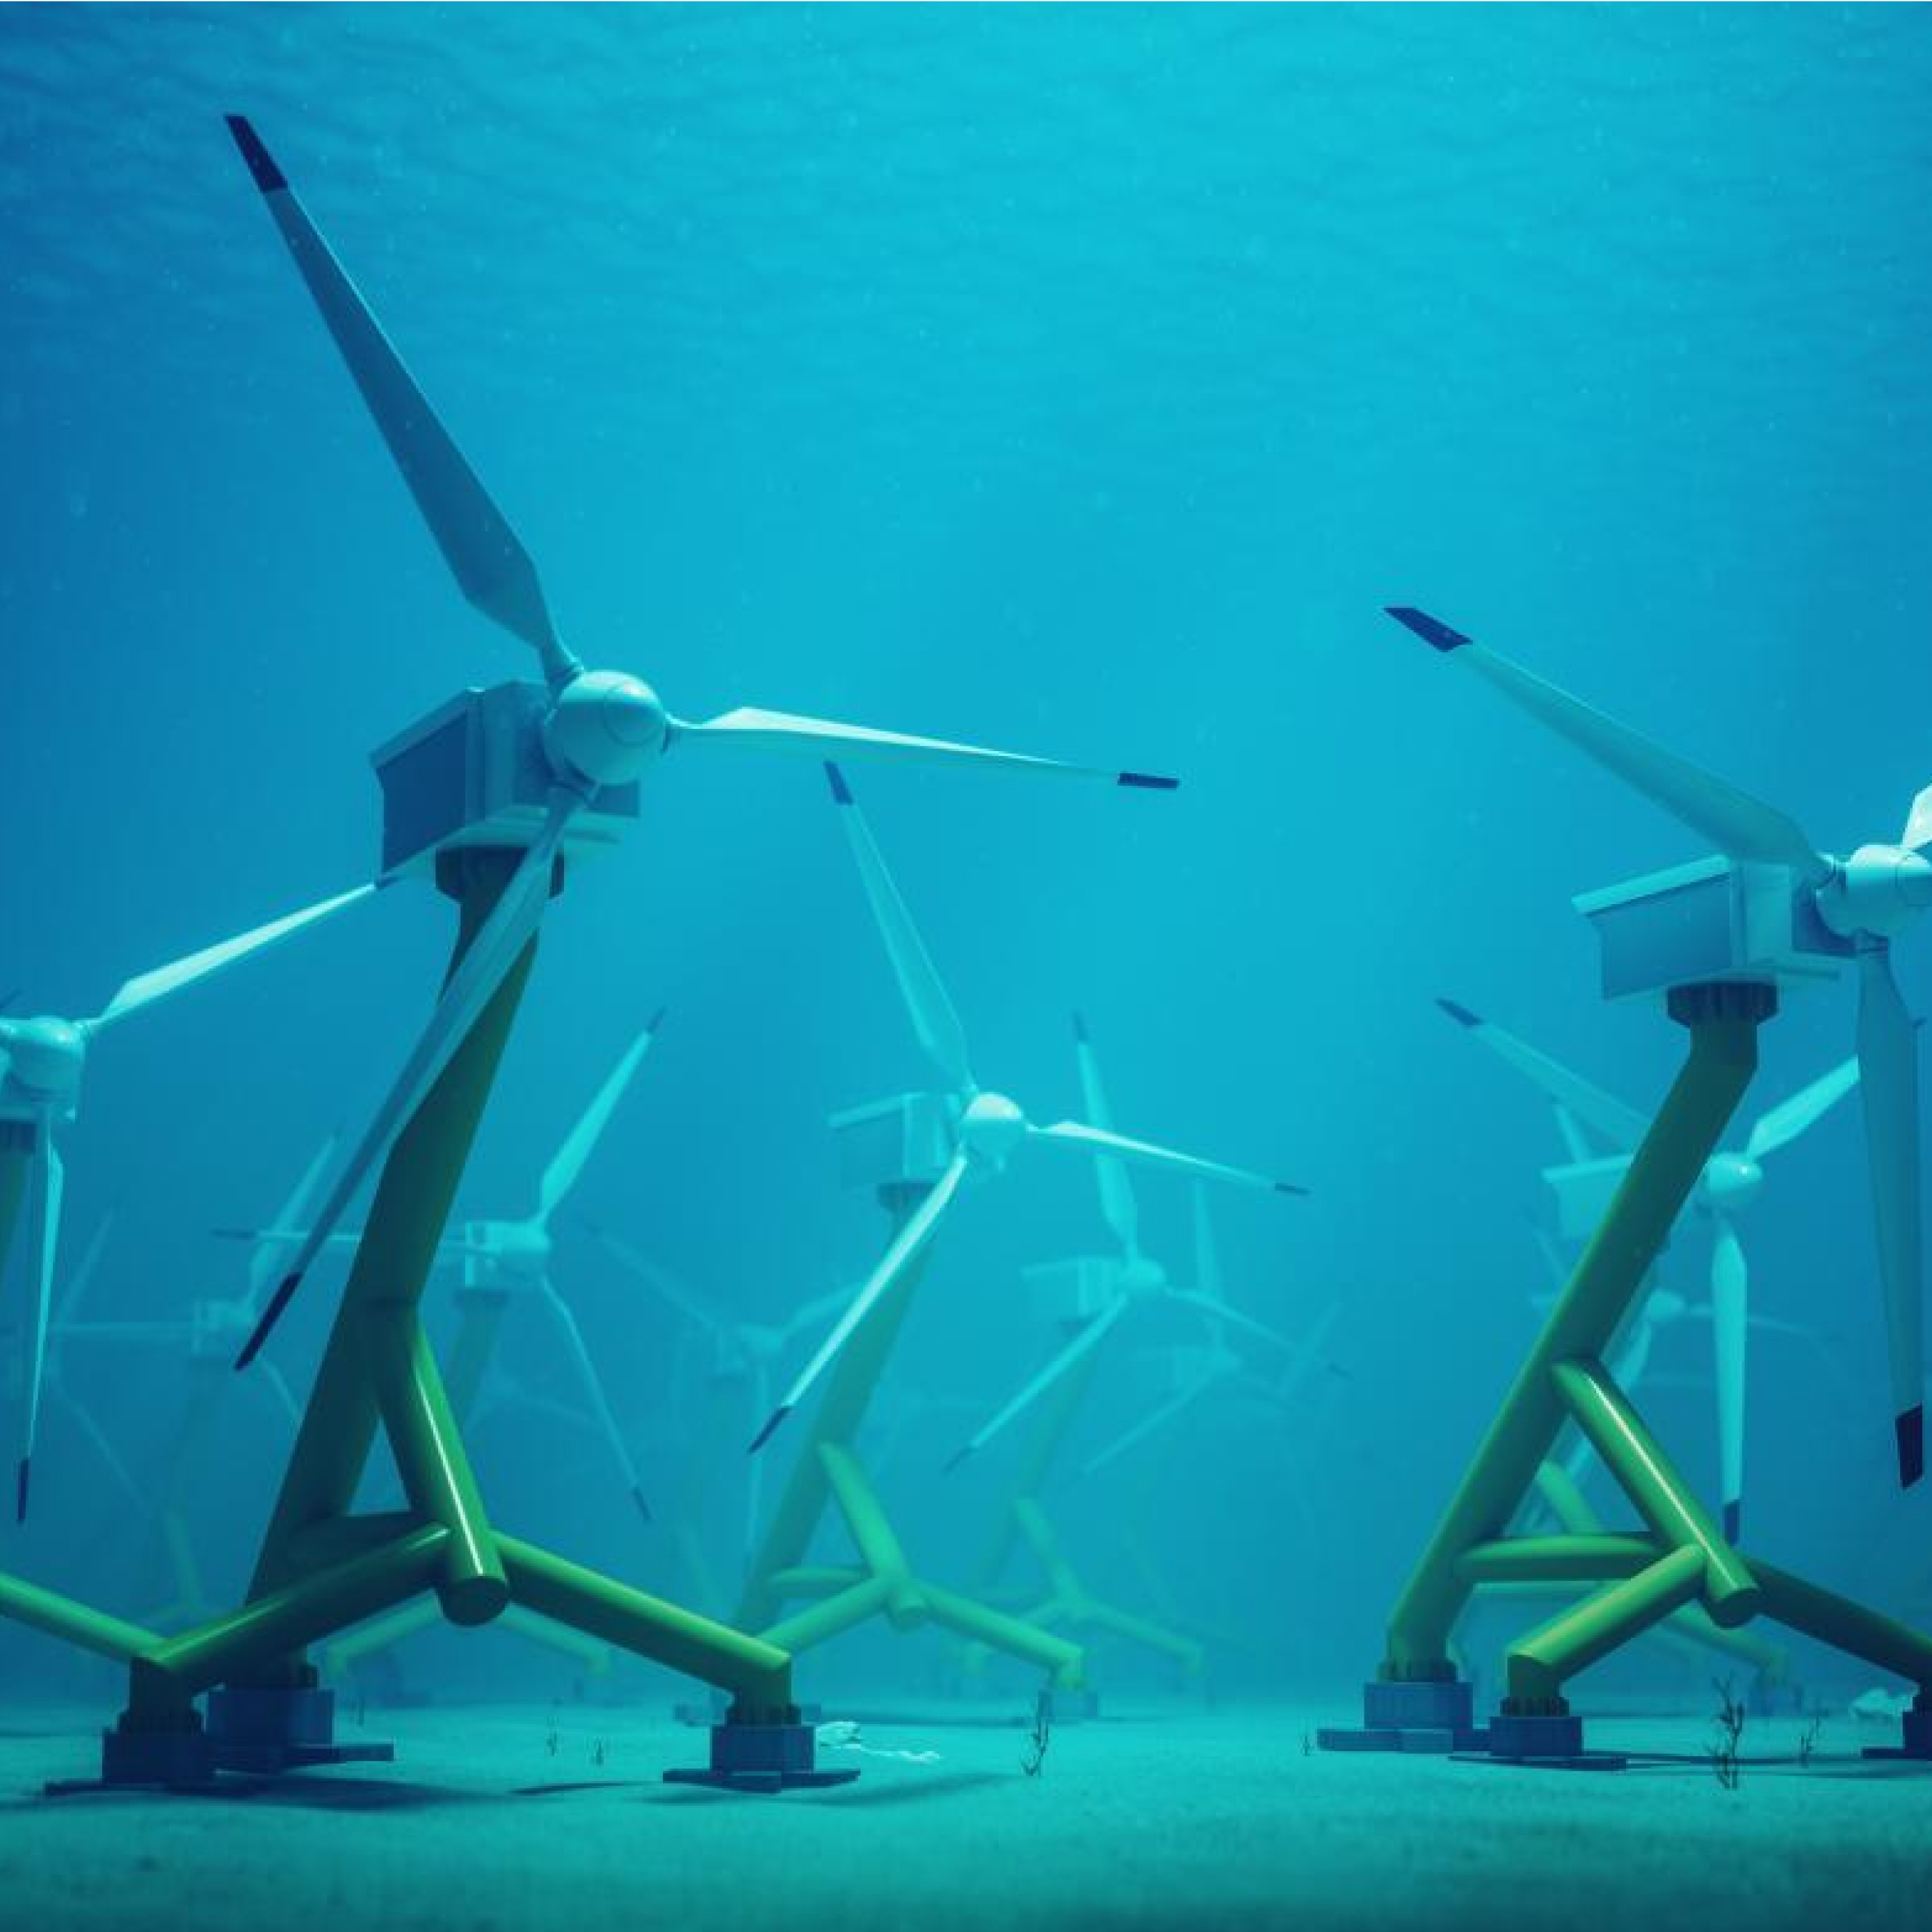 U.S. Department of Energy Invests Millions in Marine Energy Initiatives